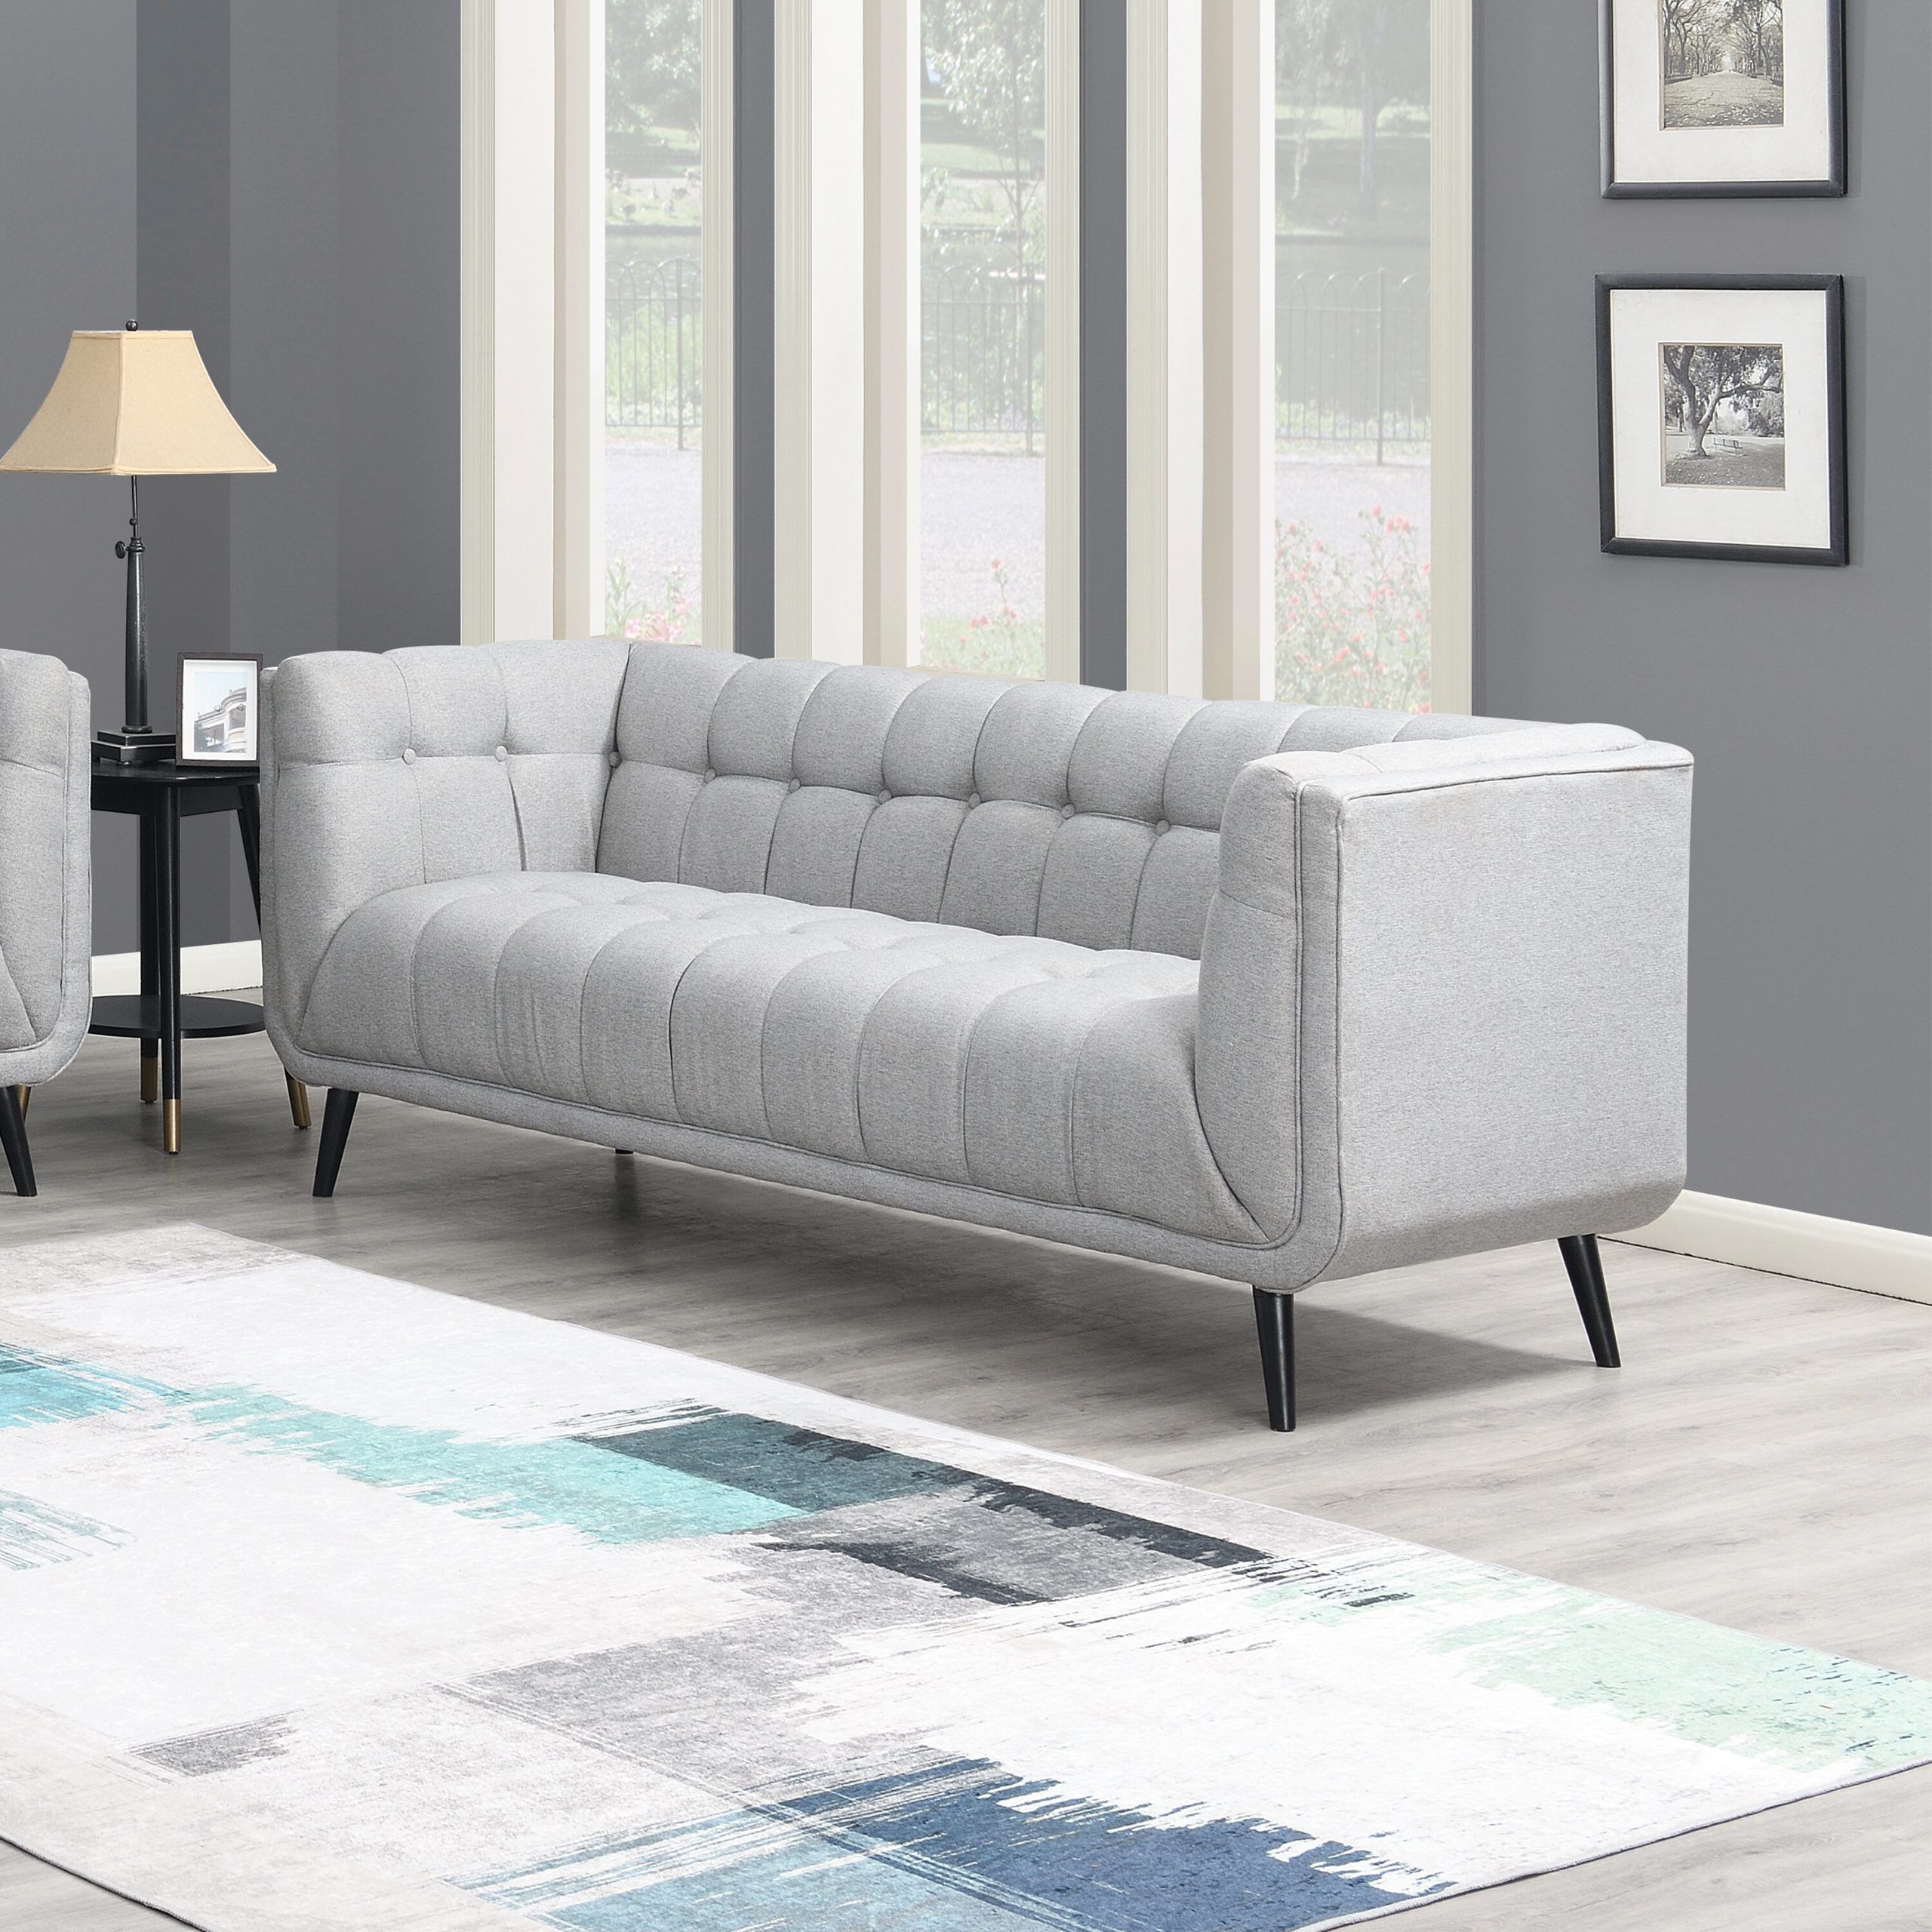 Corrigan Studio® Modern Mid Century Button Tufted Upholstered Sofa, Gray |  Wayfair With Tufted Upholstered Sofas (Photo 4 of 15)